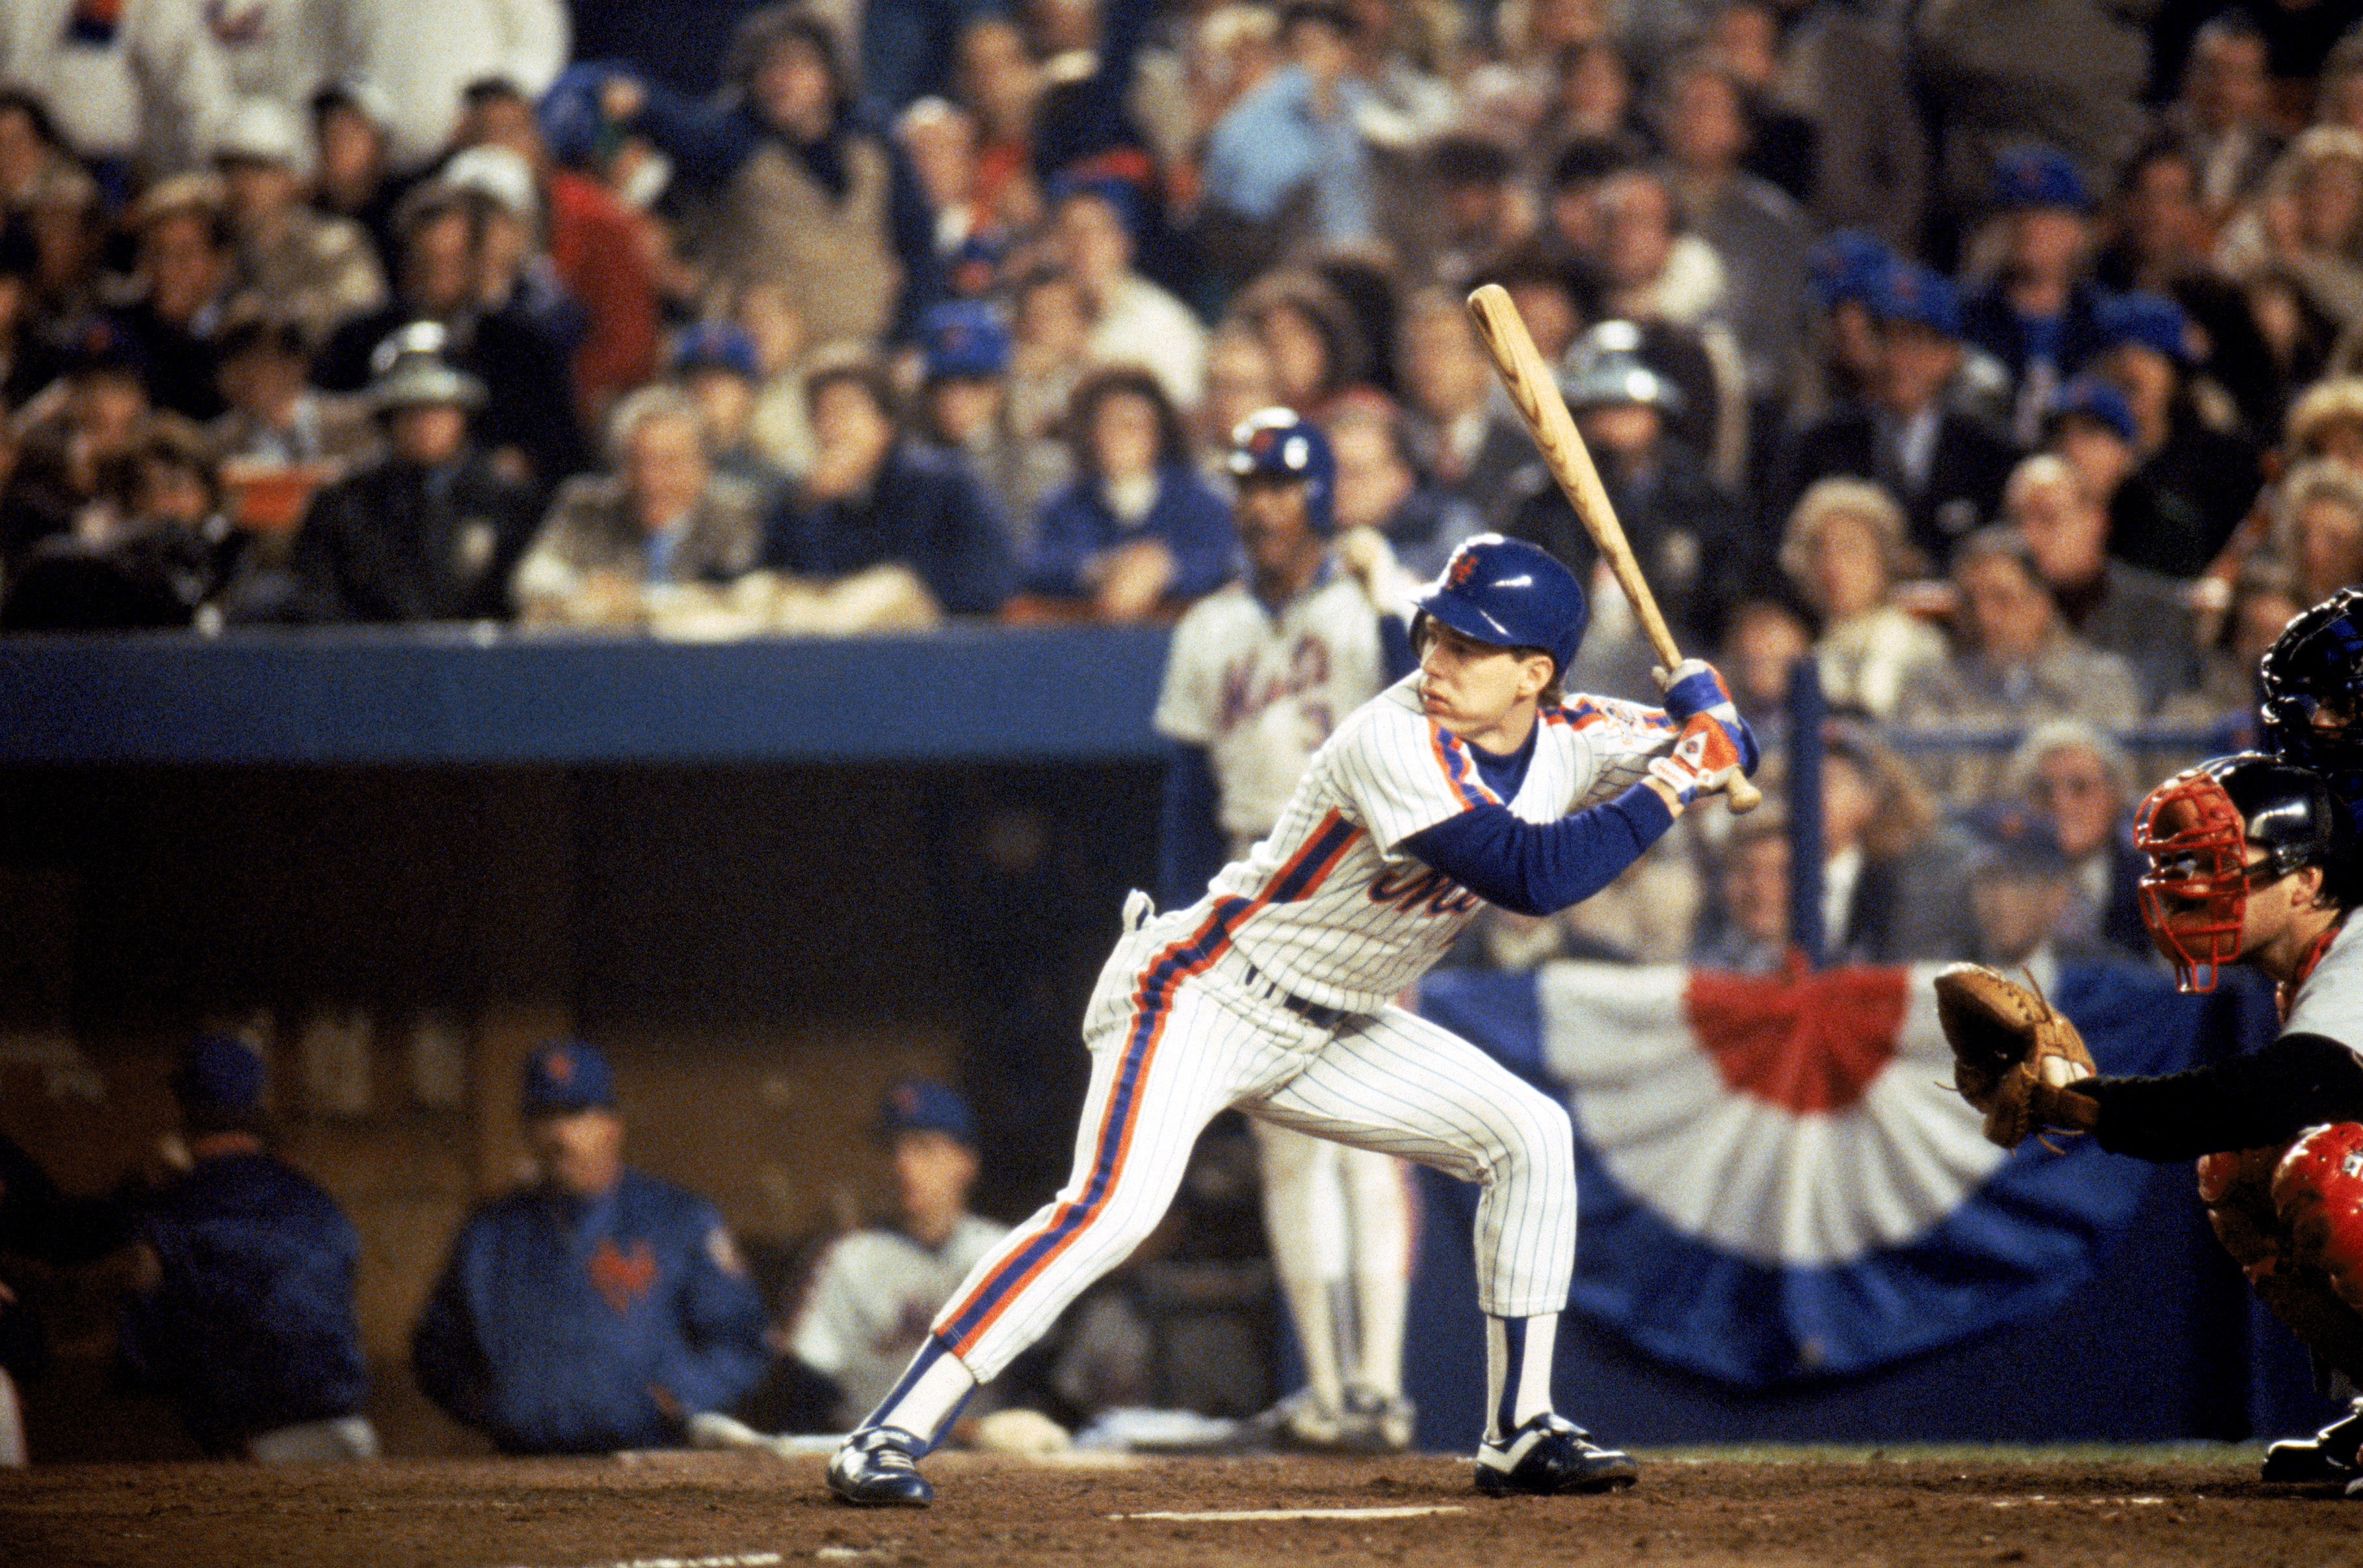 FLUSHING, NY - OCTOBER 27:  Outfielder Lenny Dykstra #4 of the New York Mets at bat during game 7 of the 1986 World Series against the Boston Red Sox at Shea Stadium on October 27, 1986 in Flushing, New York. The Mets won the series 4-3.  (Photo by T.G. H